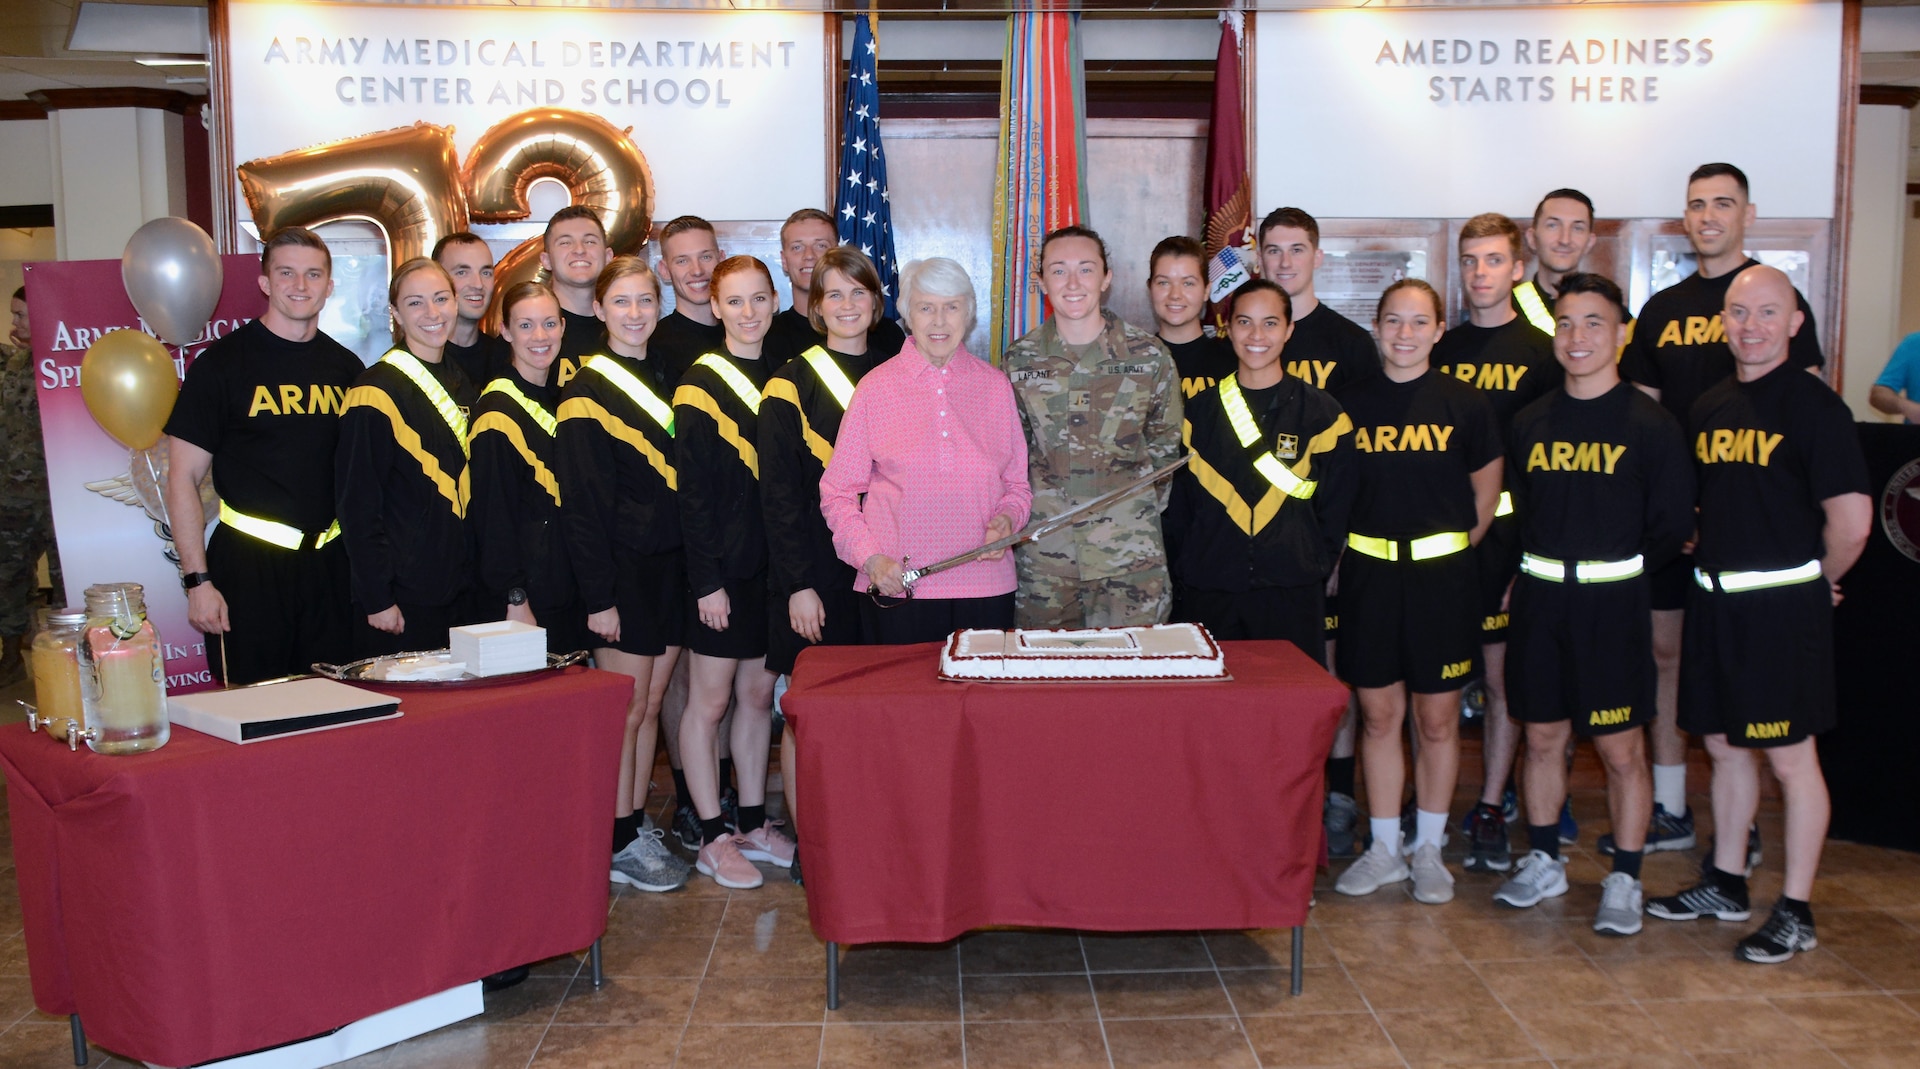 Retired Col. Jessie Breuer, 2nd Lt. Carley Laplant, and 19 of the newest members of the Army Medical Specialist Corps at the cake-cutting ceremony at the U.S. Army Medical Department Center and School, Health Readiness Center of Excellence, or AMEDDC&S HRCoE, headquarters building at Joint Base San Antonio-Fort Sam Houston April 16.